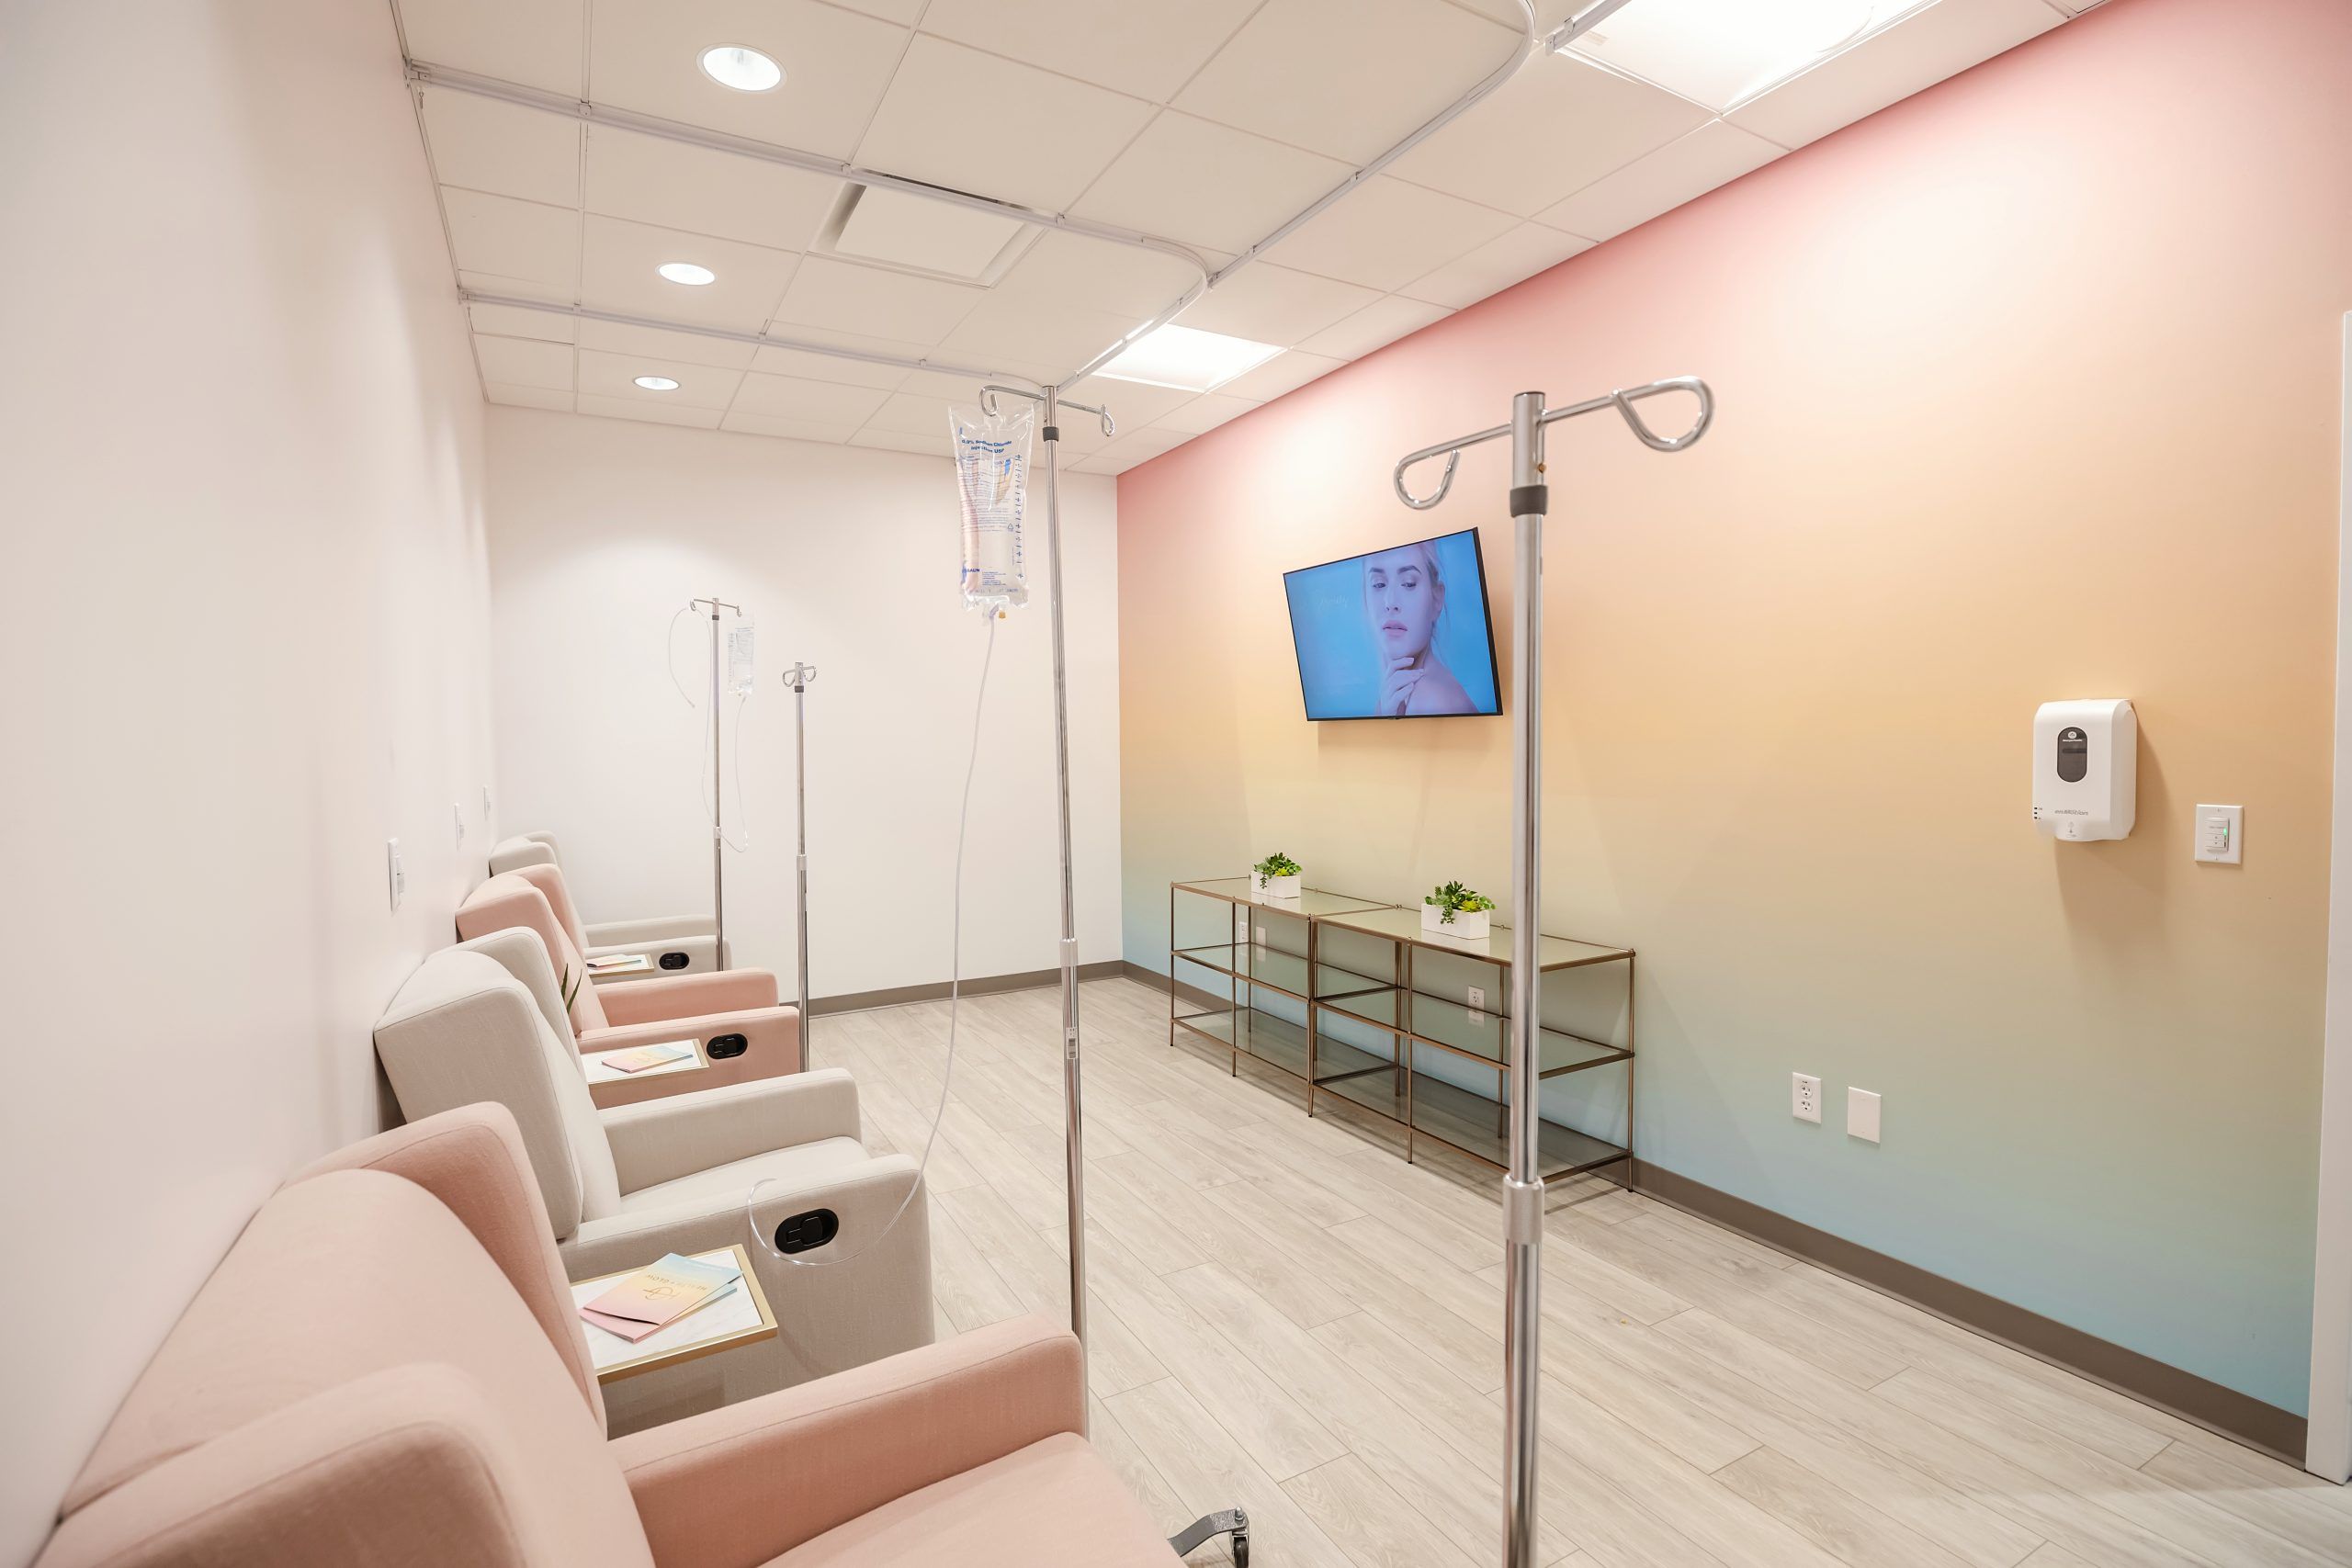 Serene IV therapy area with comfy chairs, offering a tranquil space for treatment.